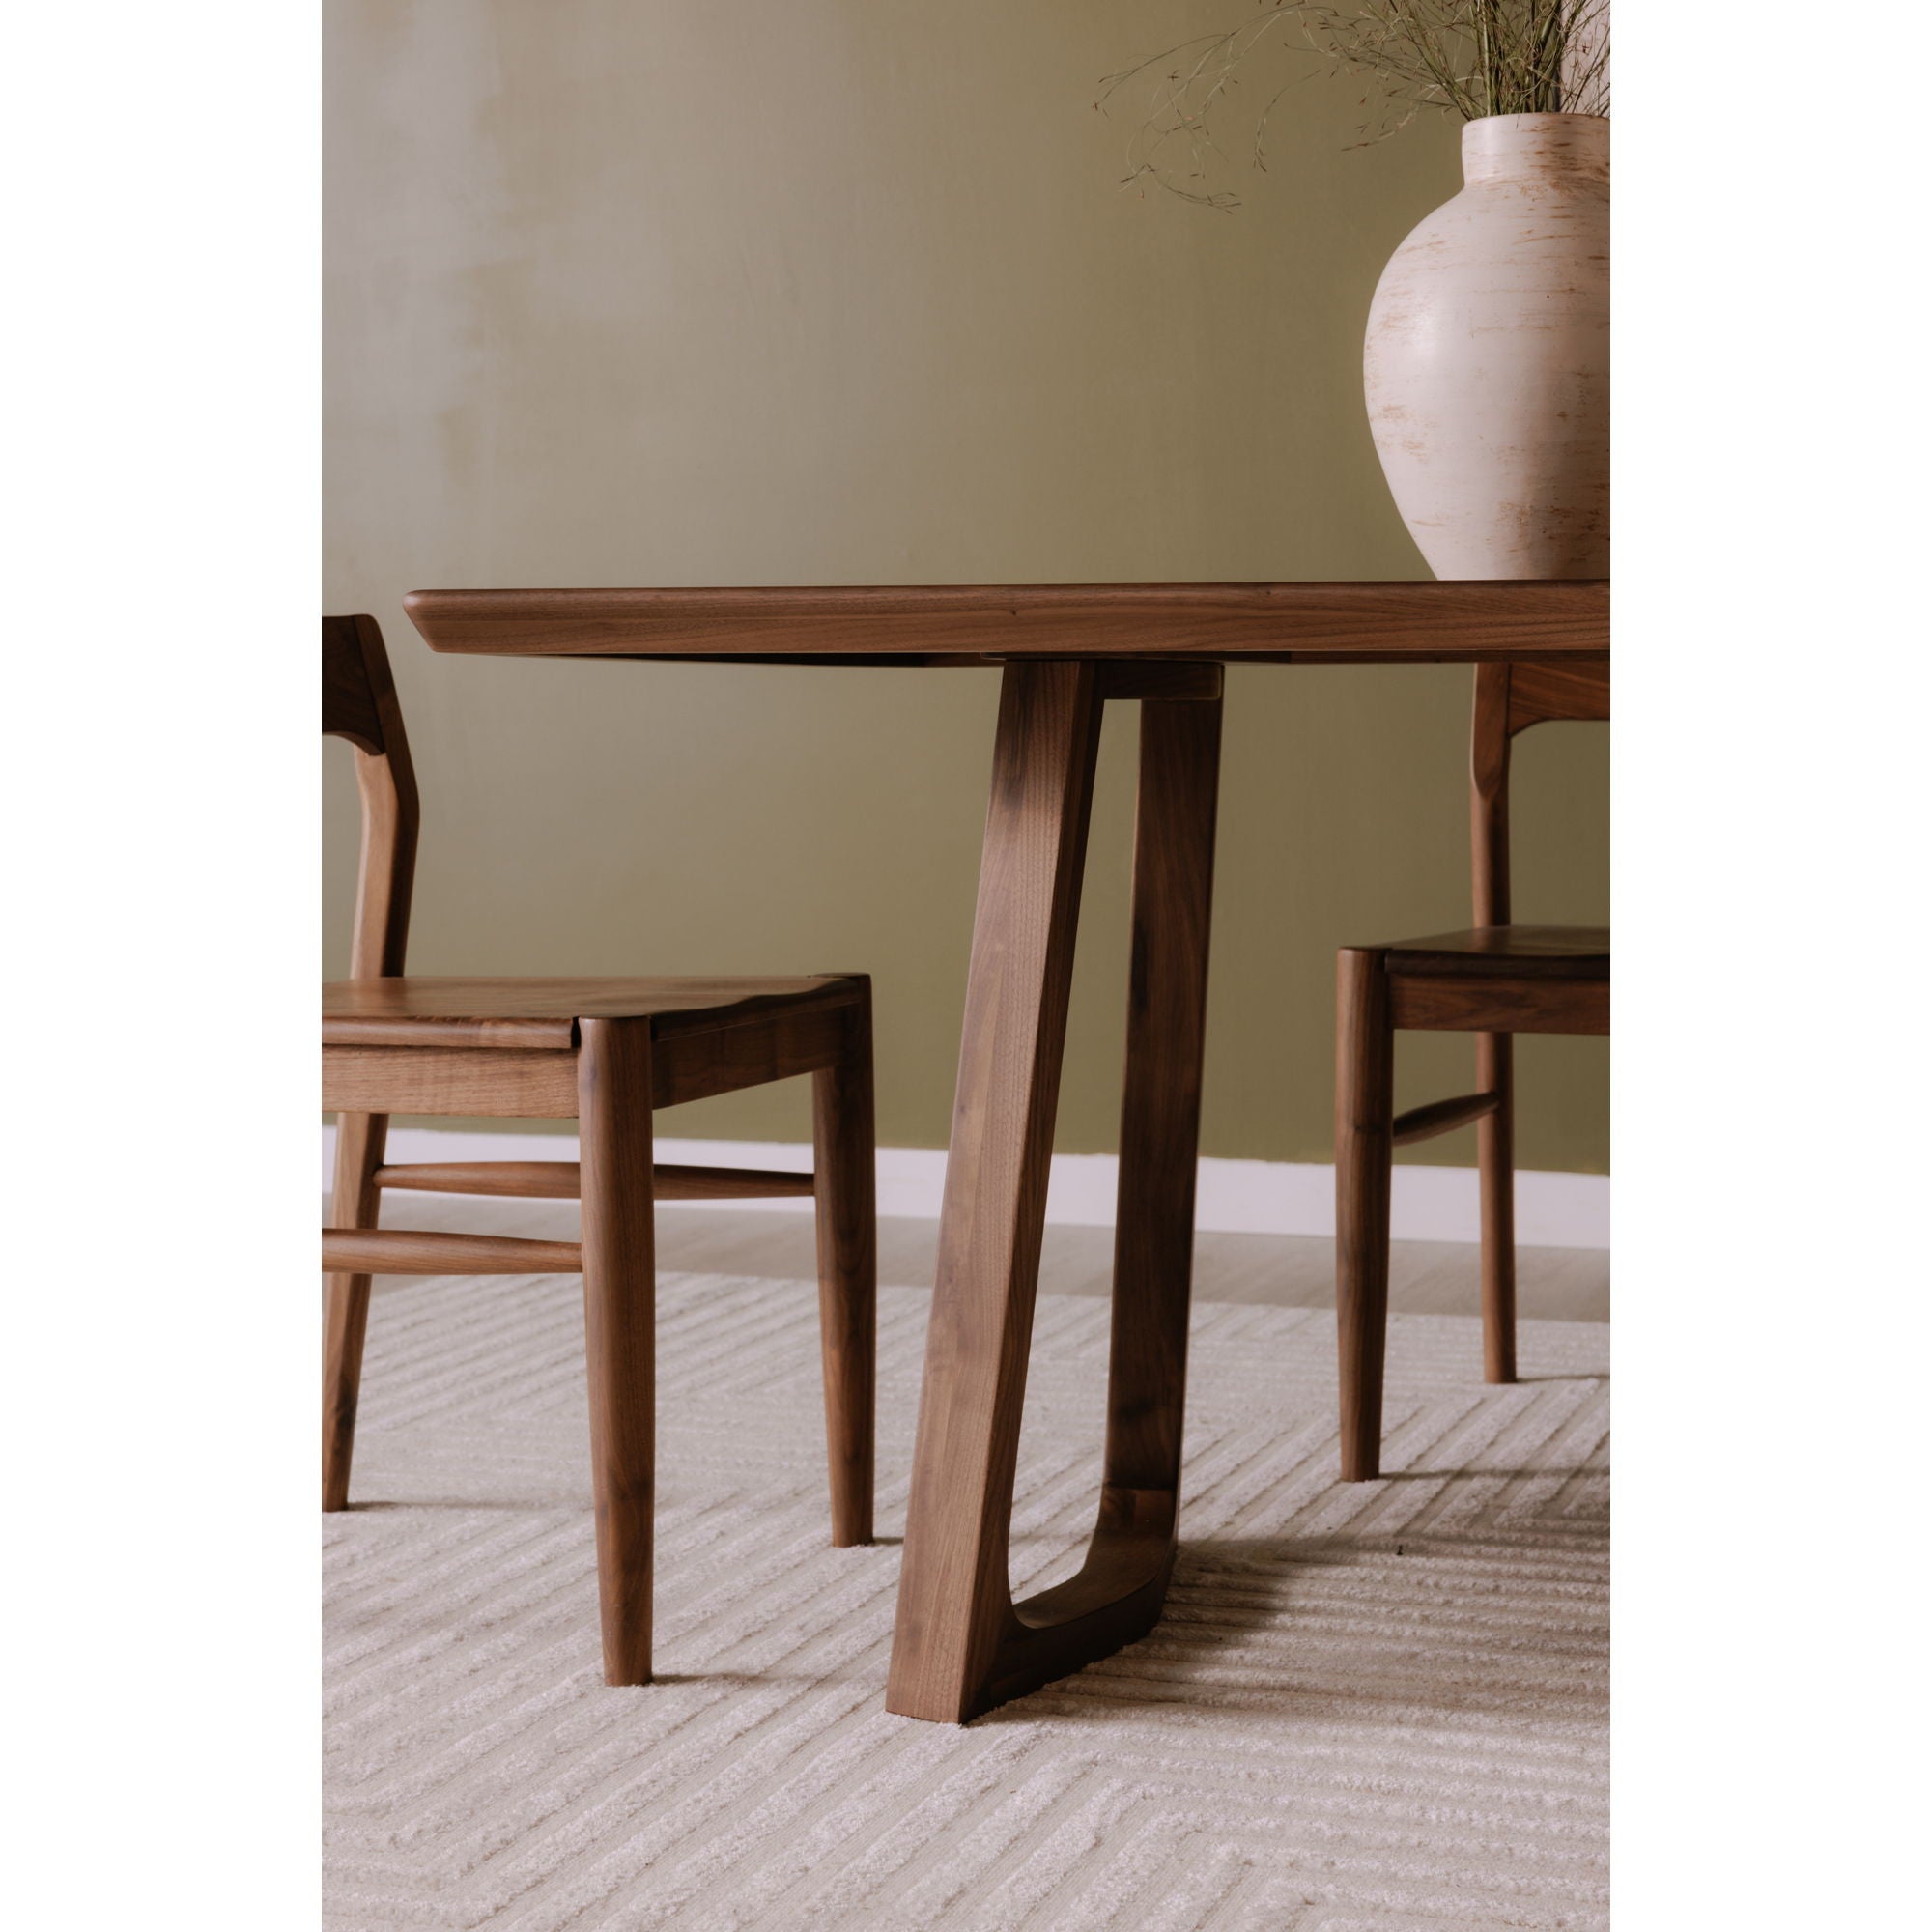 Silas - Dining Table - Natural